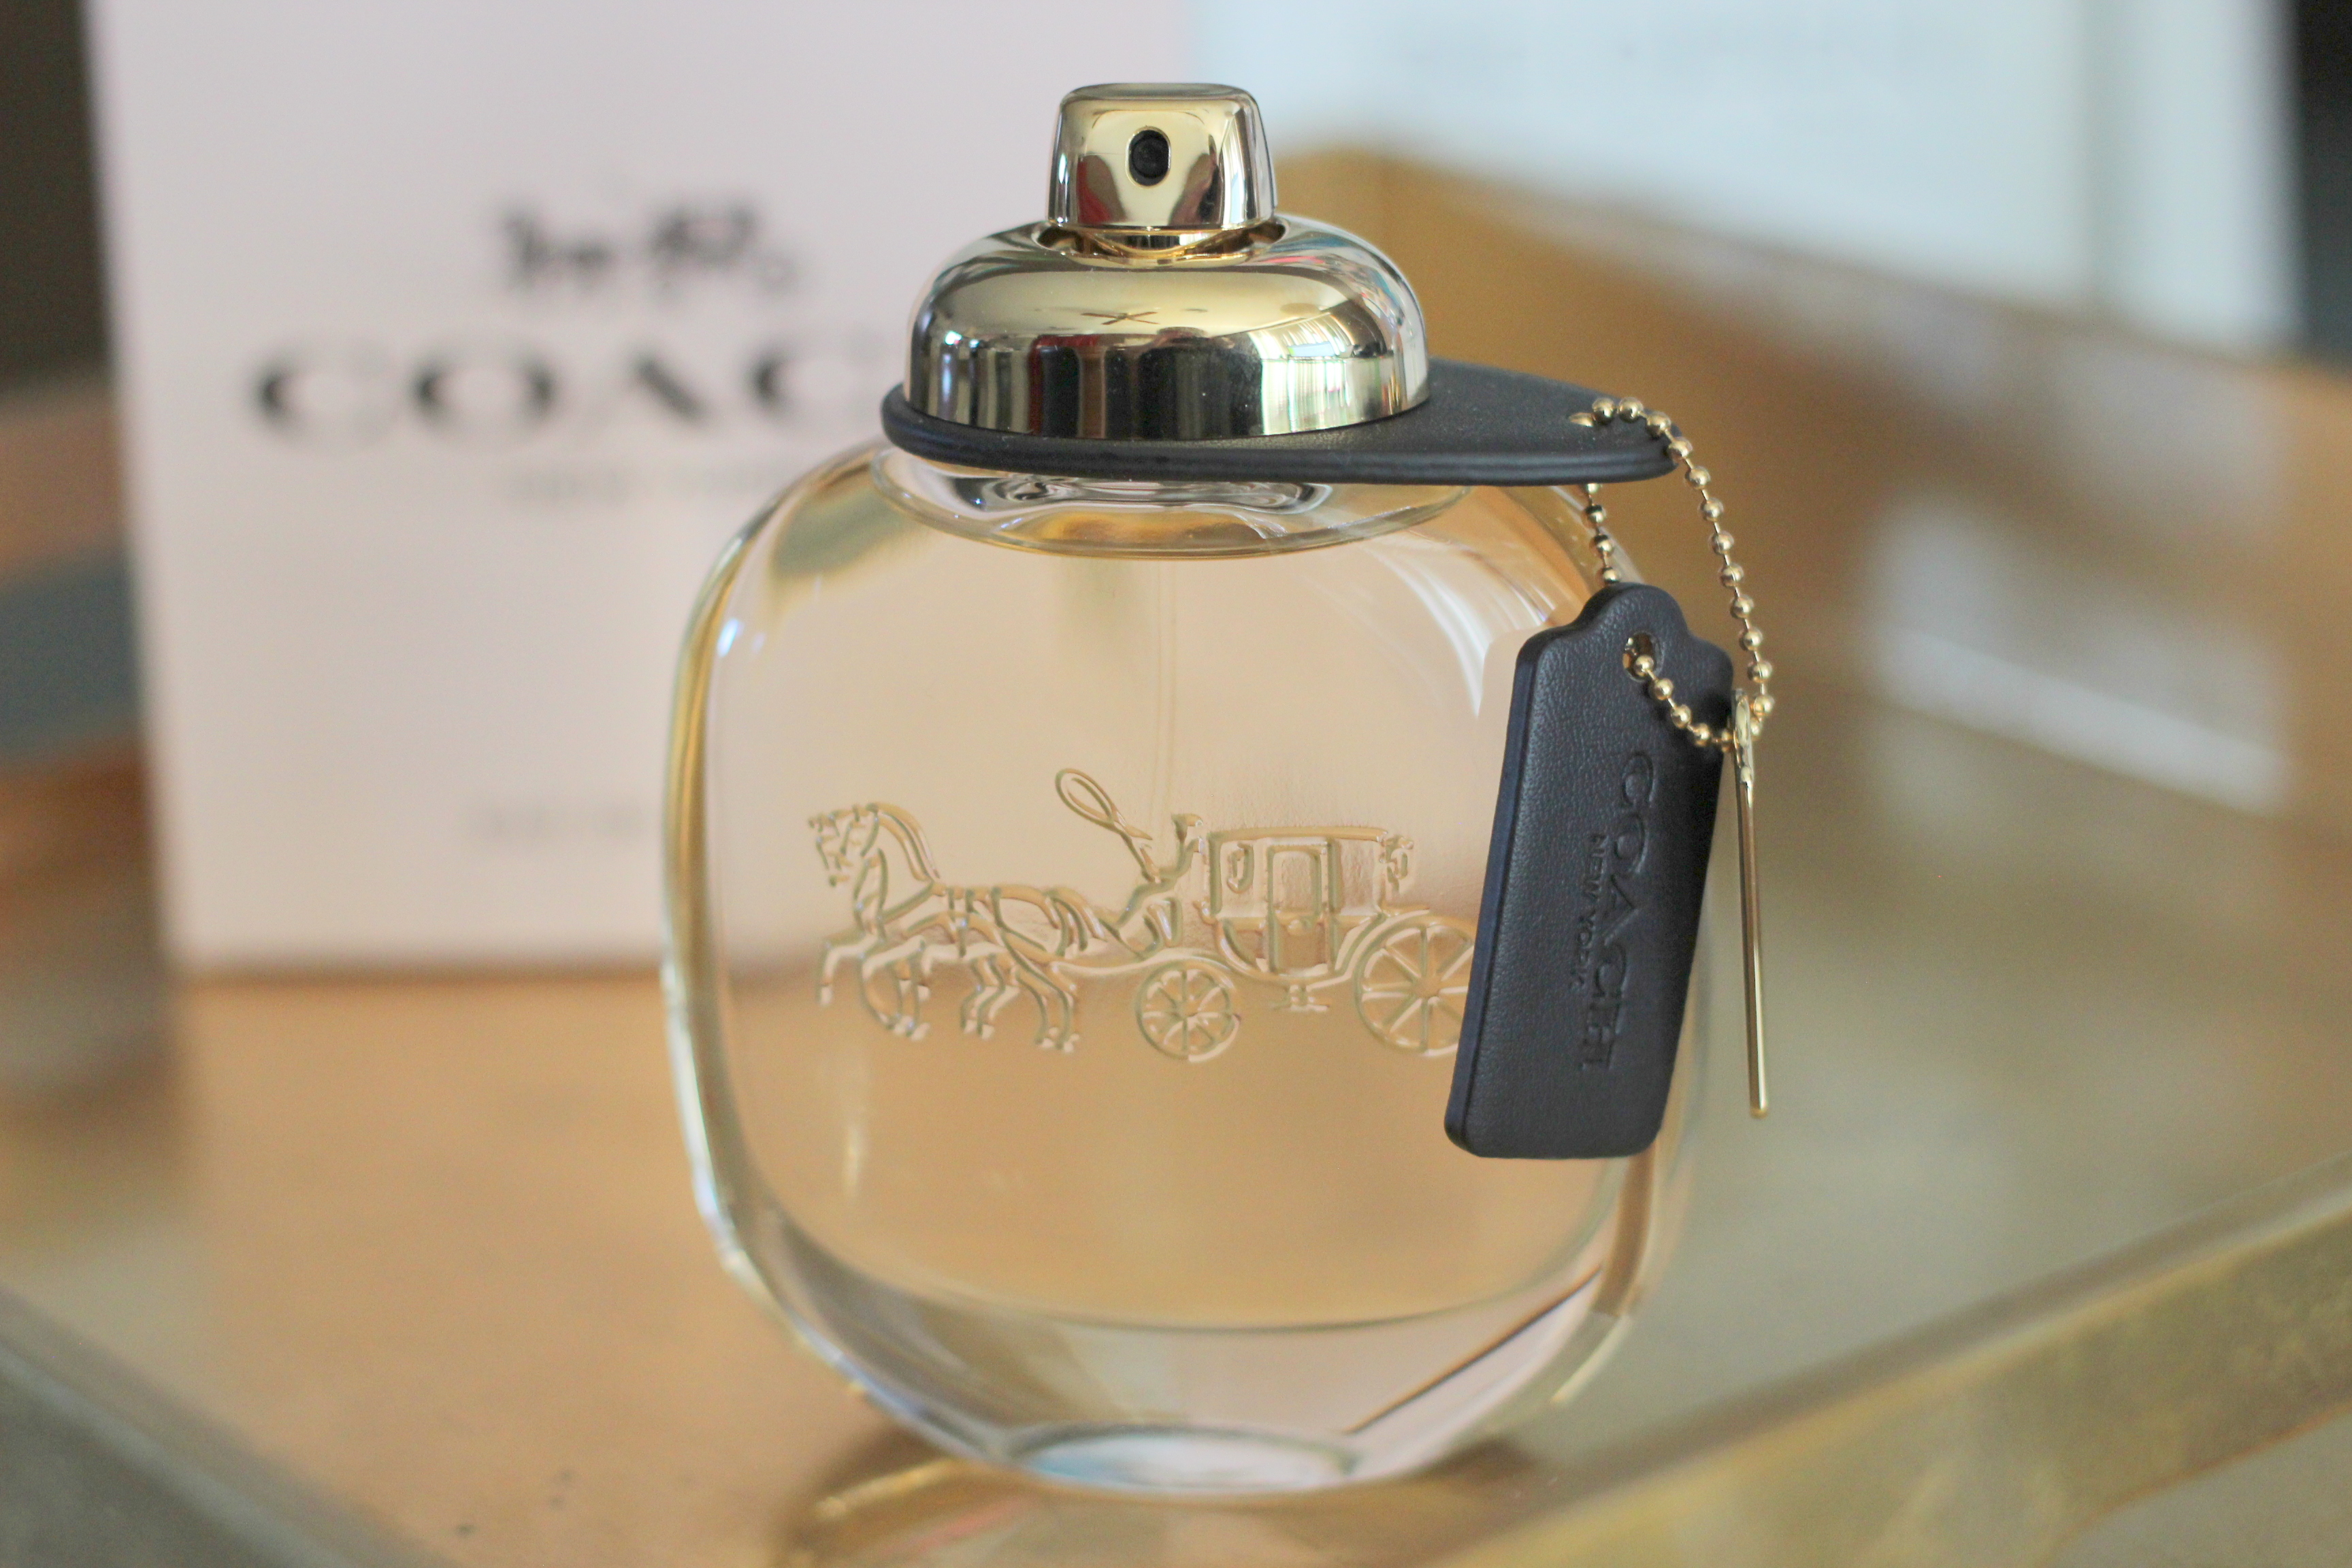 Indulge and Pamper Yourself with Coach Eau de Parfum - My Highest Self